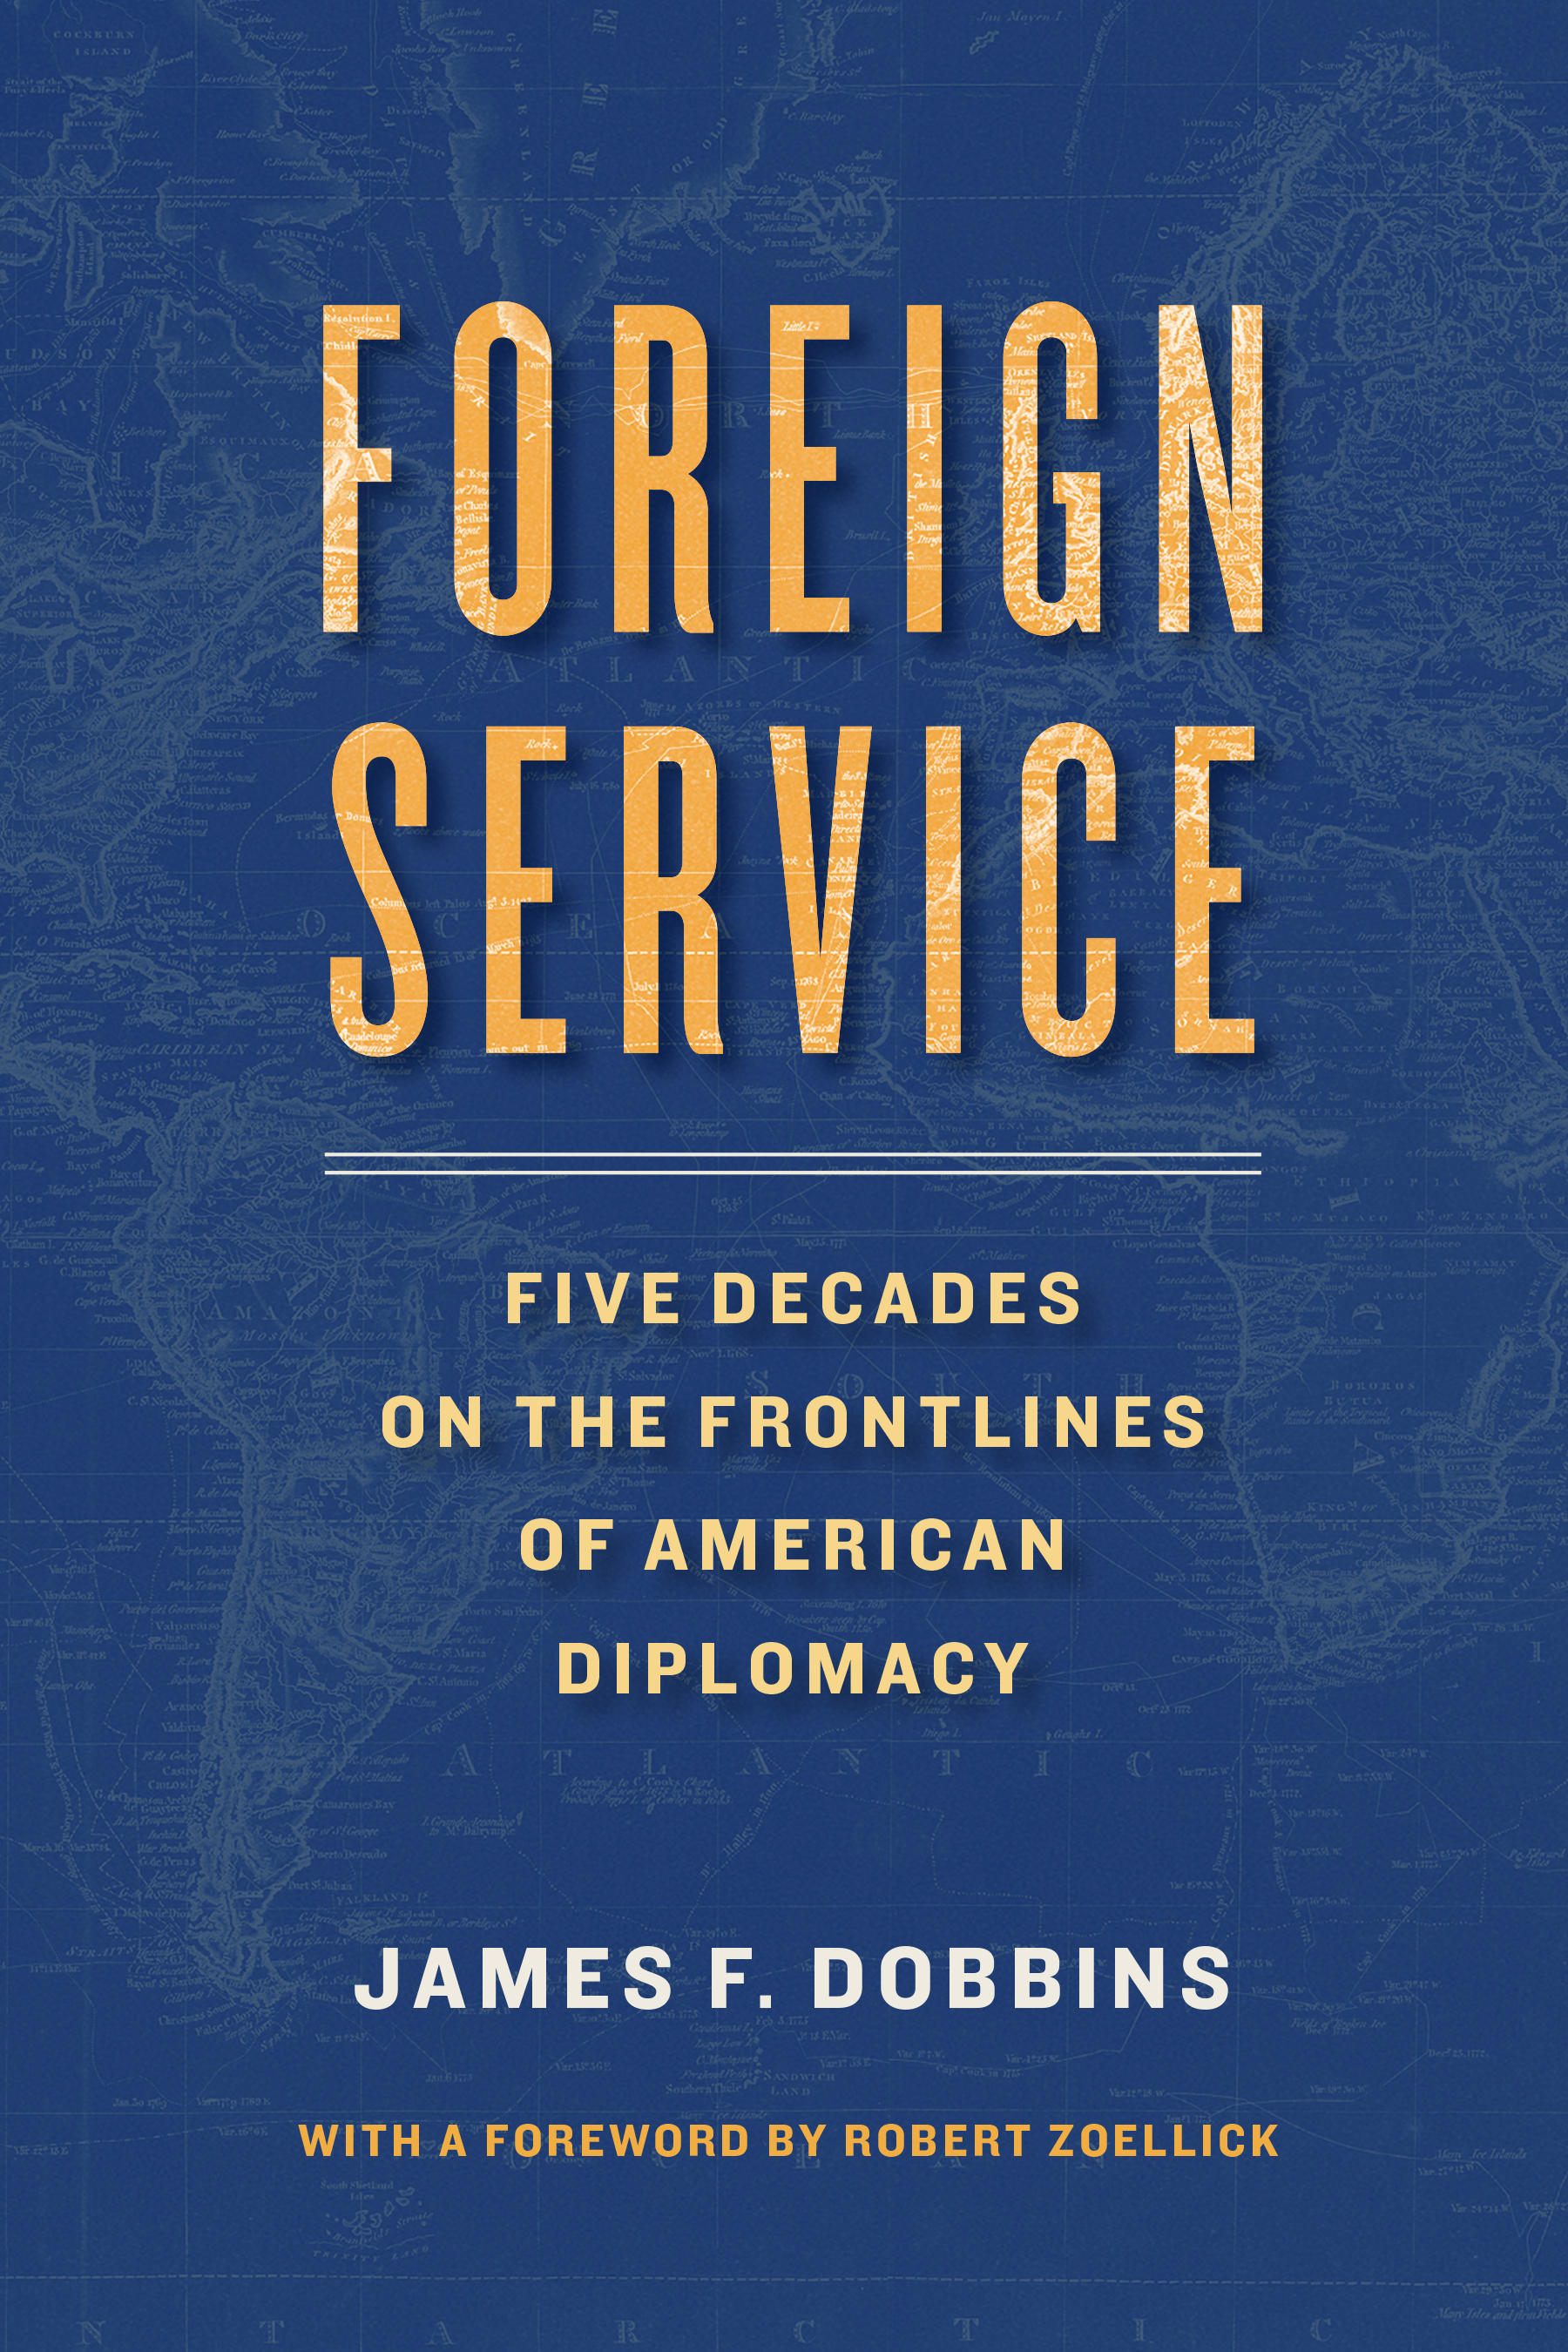 Foreign Service: Five Decades on the Frontlines of American Diplomacy